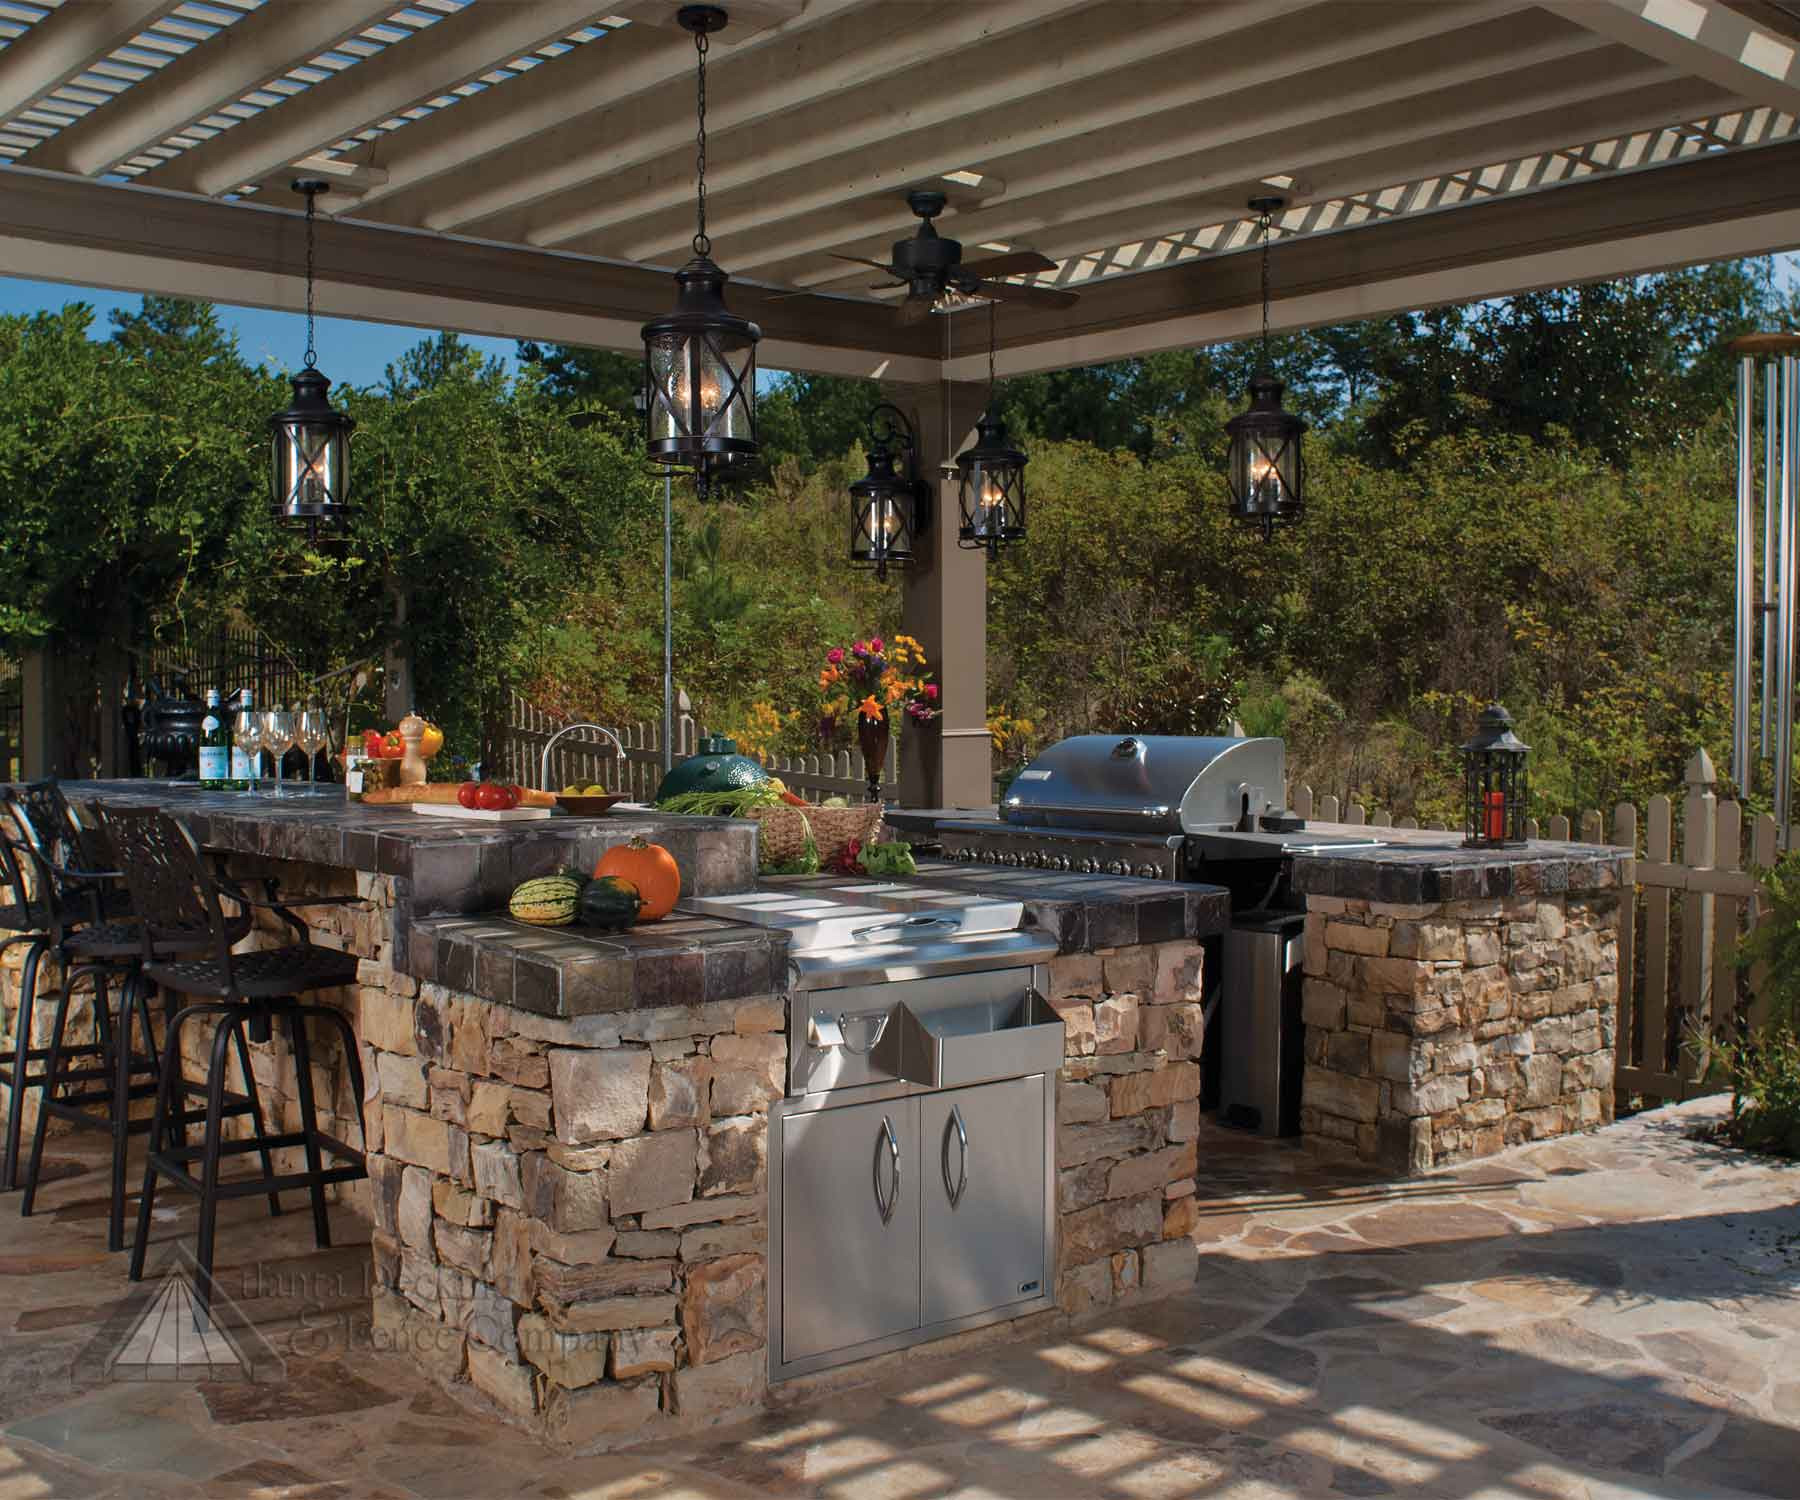 Outdoor Kitchen Decor
 Outdoor Kitchen Designing The Perfect Backyard Cooking